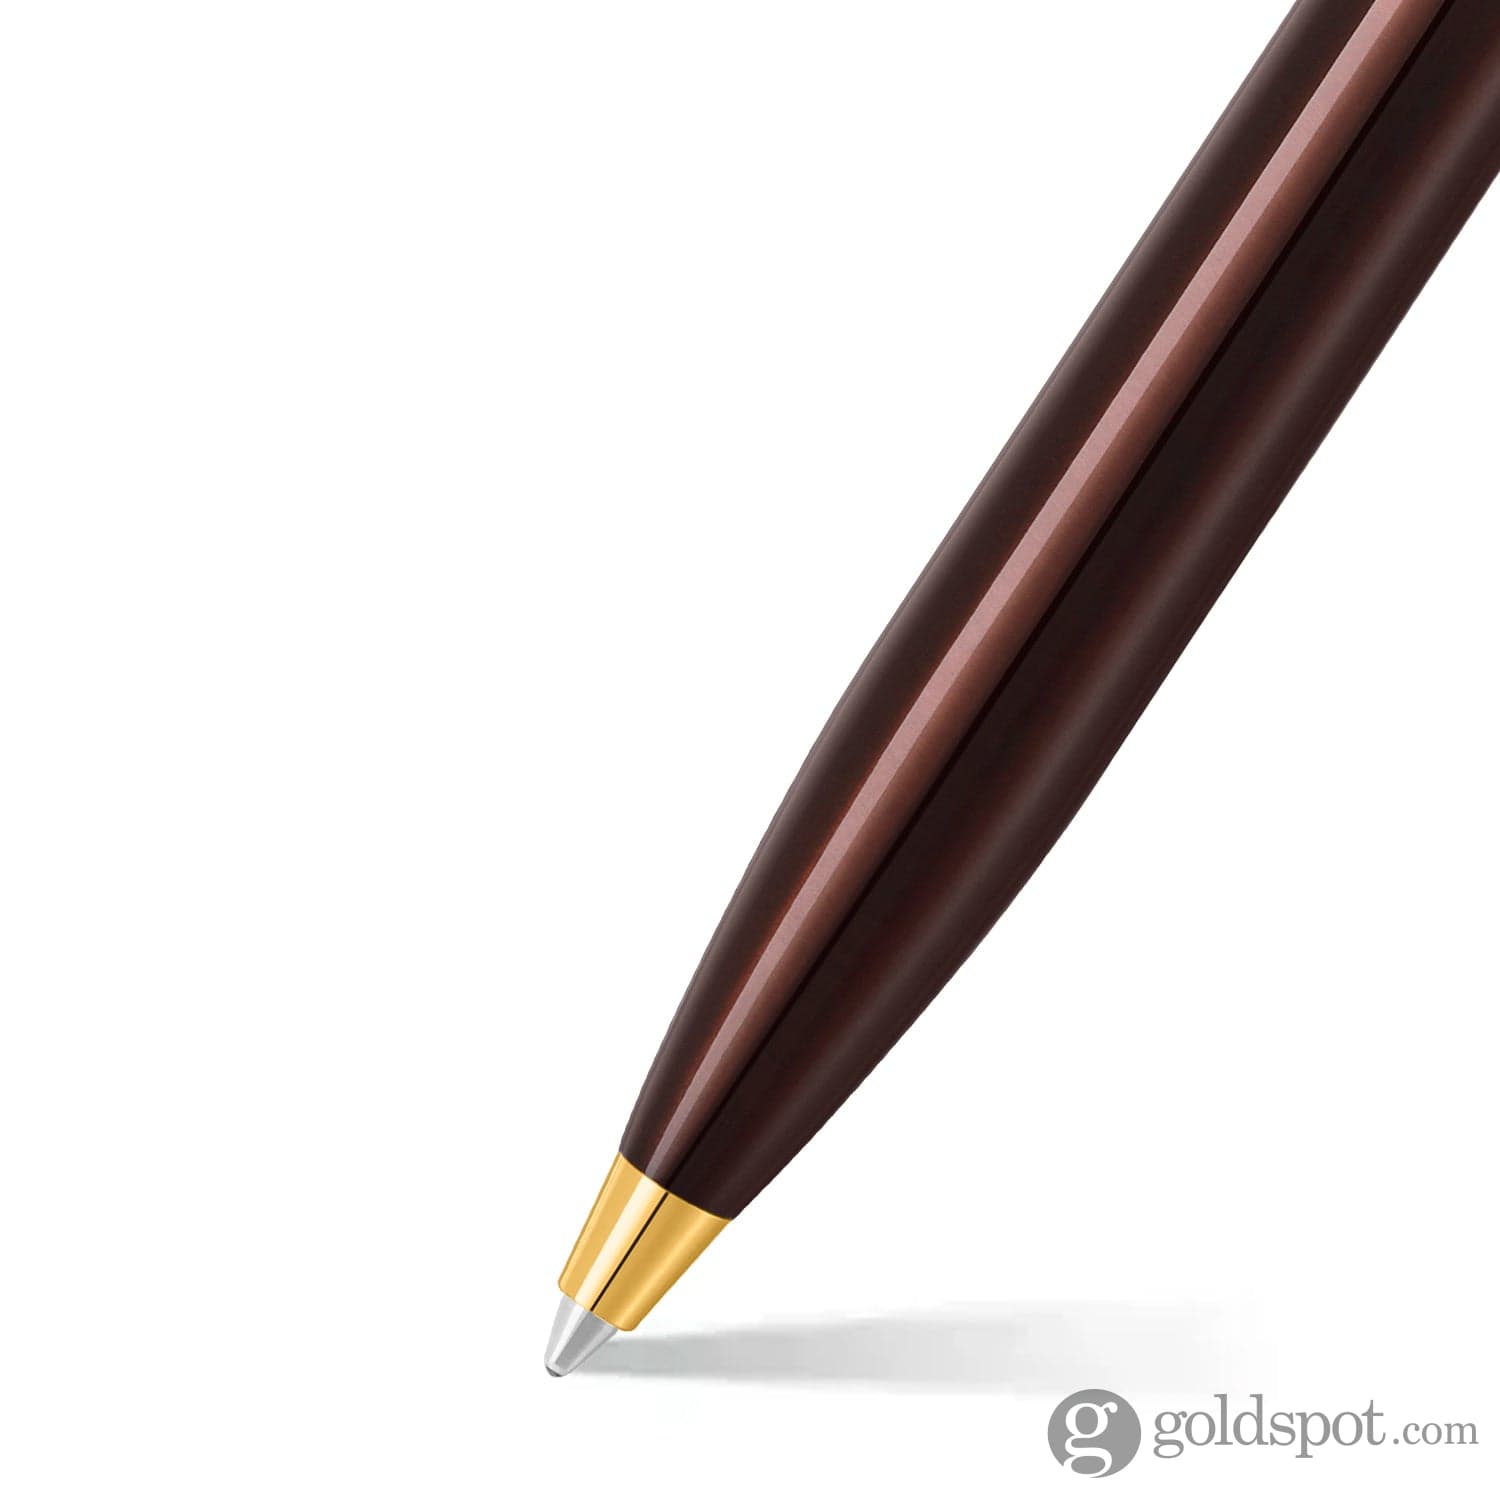 Sheaffer 100 E9370 Ballpoint Pen Coffee Brown with PVD Gold Trim